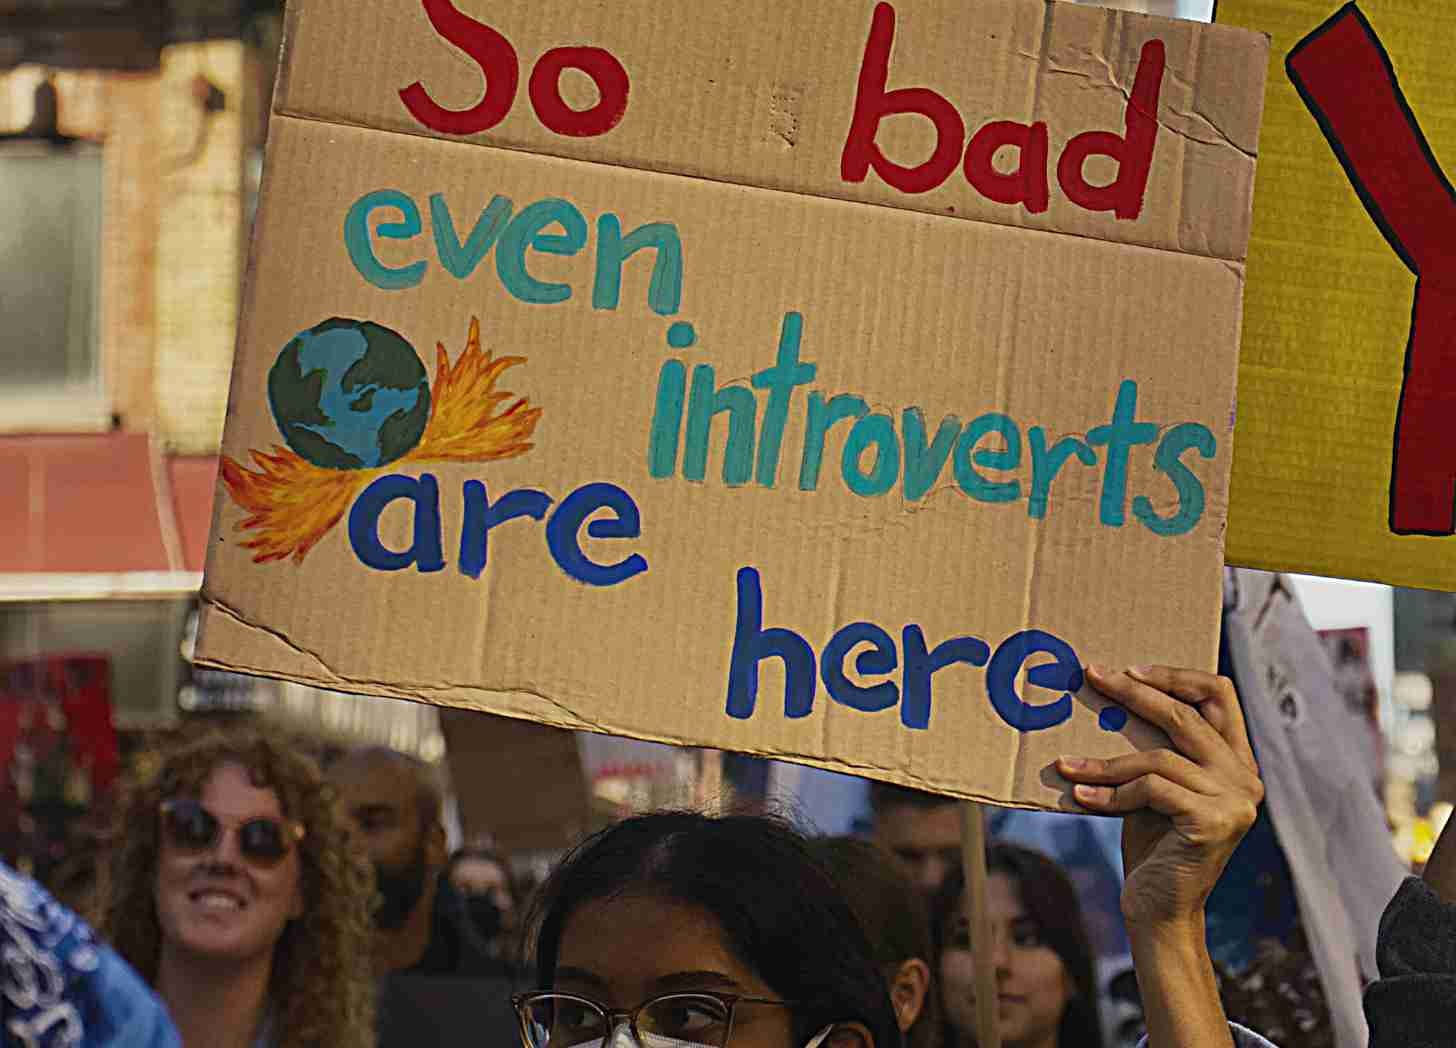 A climate protestor holds a cardboard sign that reads "So bad even intorverts are here